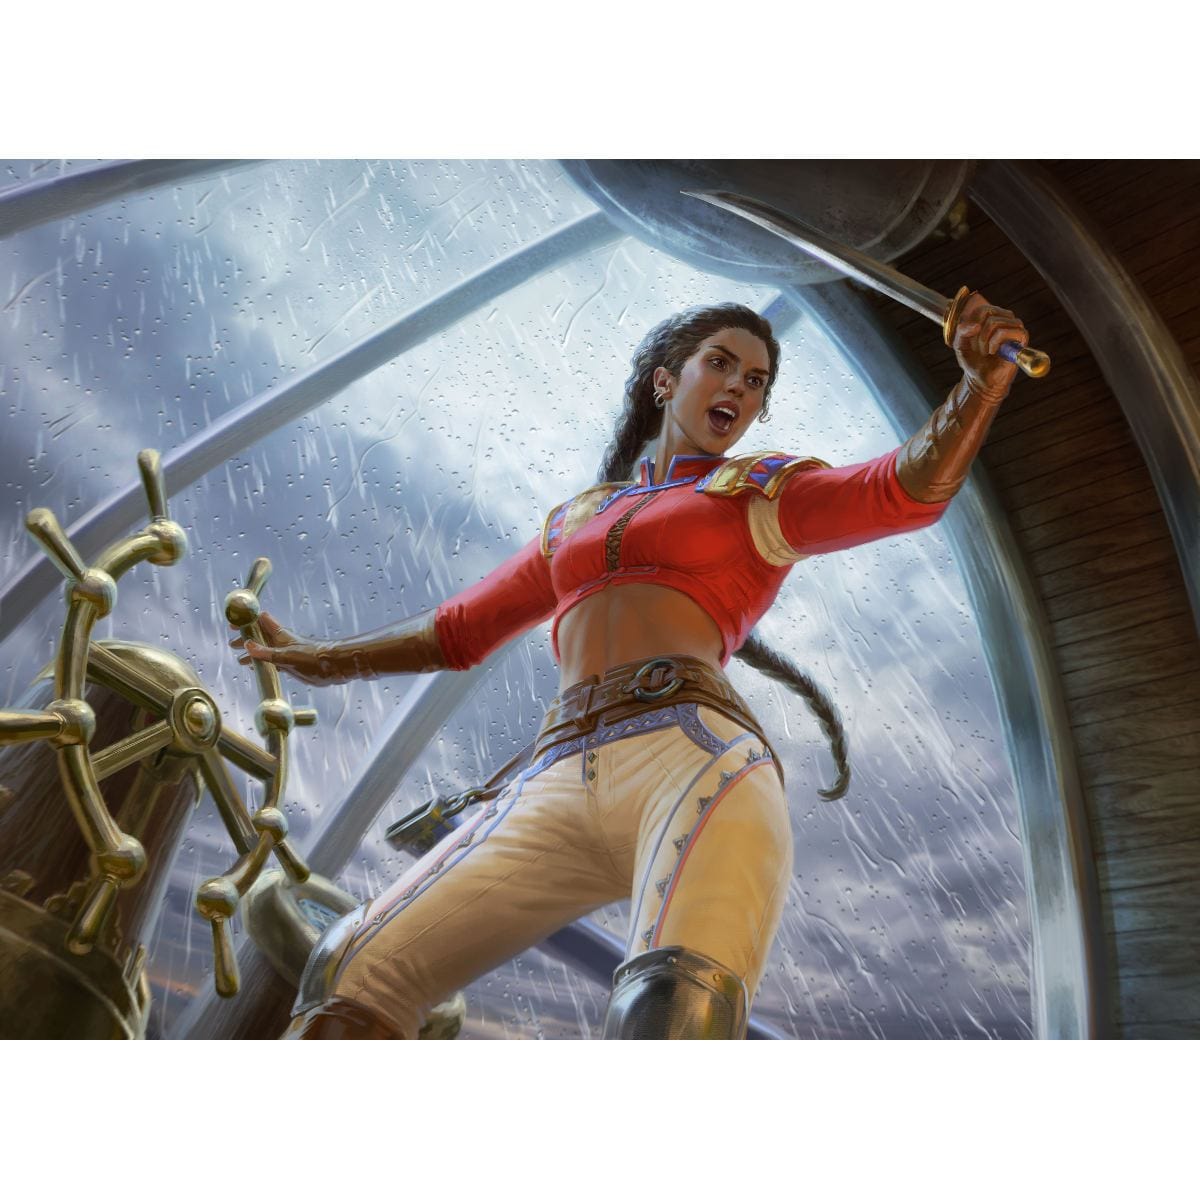 Sisay, Weatherlight Captain Print - Print - Original Magic Art - Accessories for Magic the Gathering and other card games